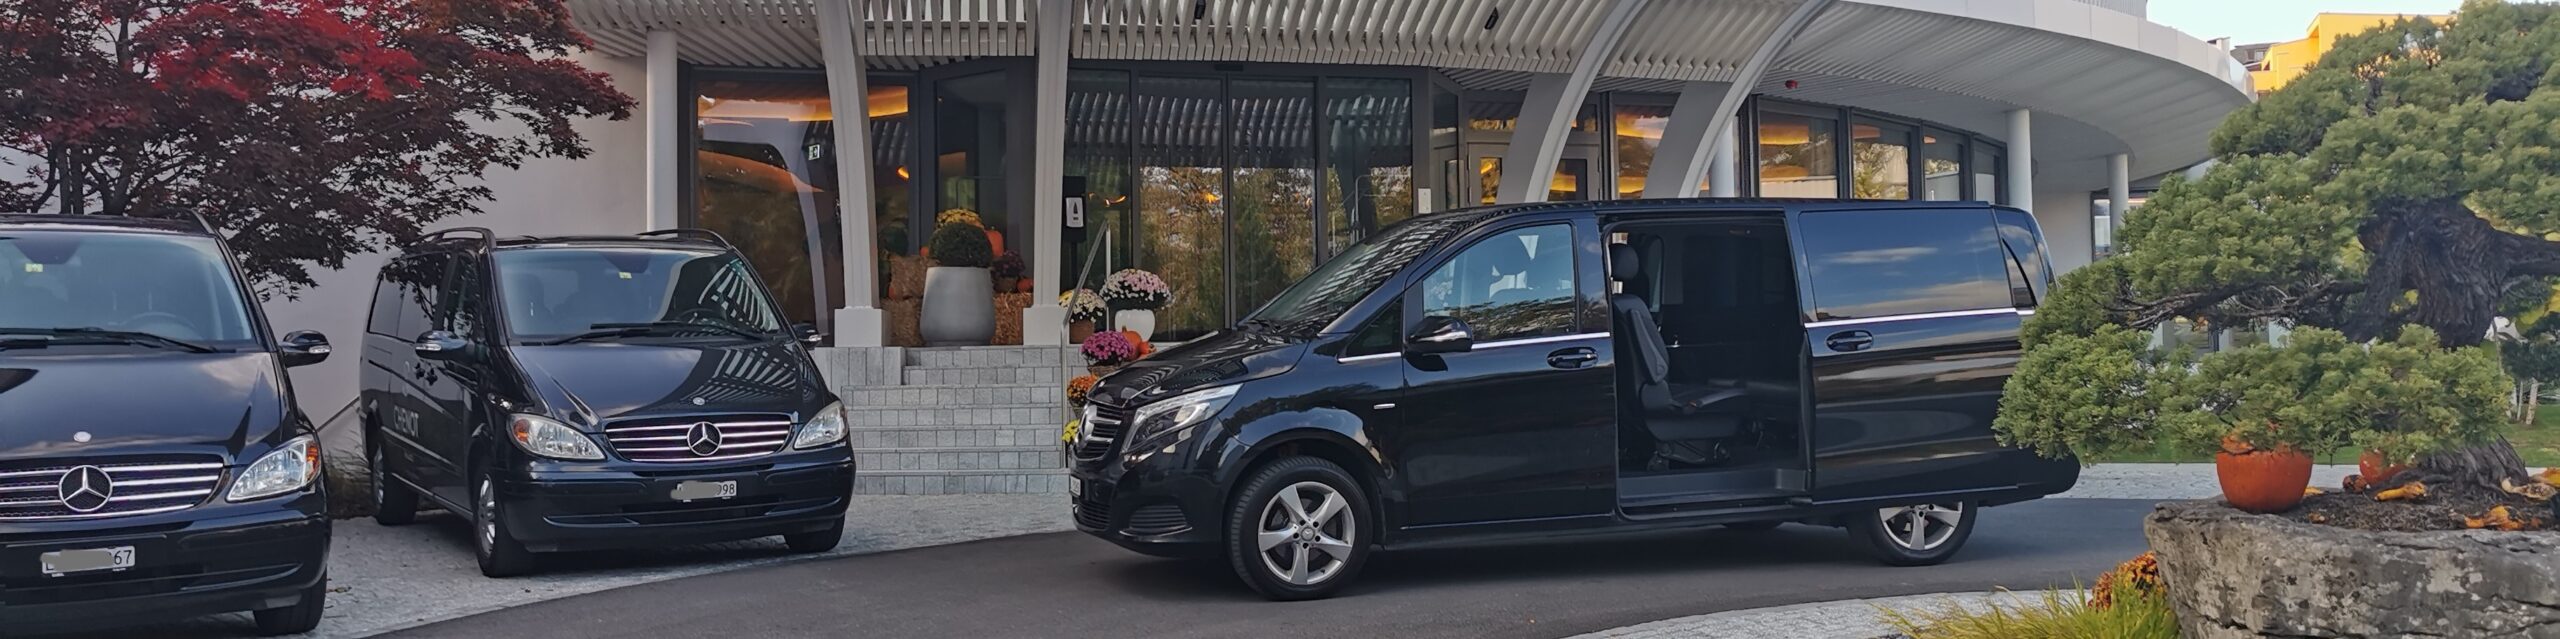 Minivans in front of a hotel after a transfer from zurich airport to meggen